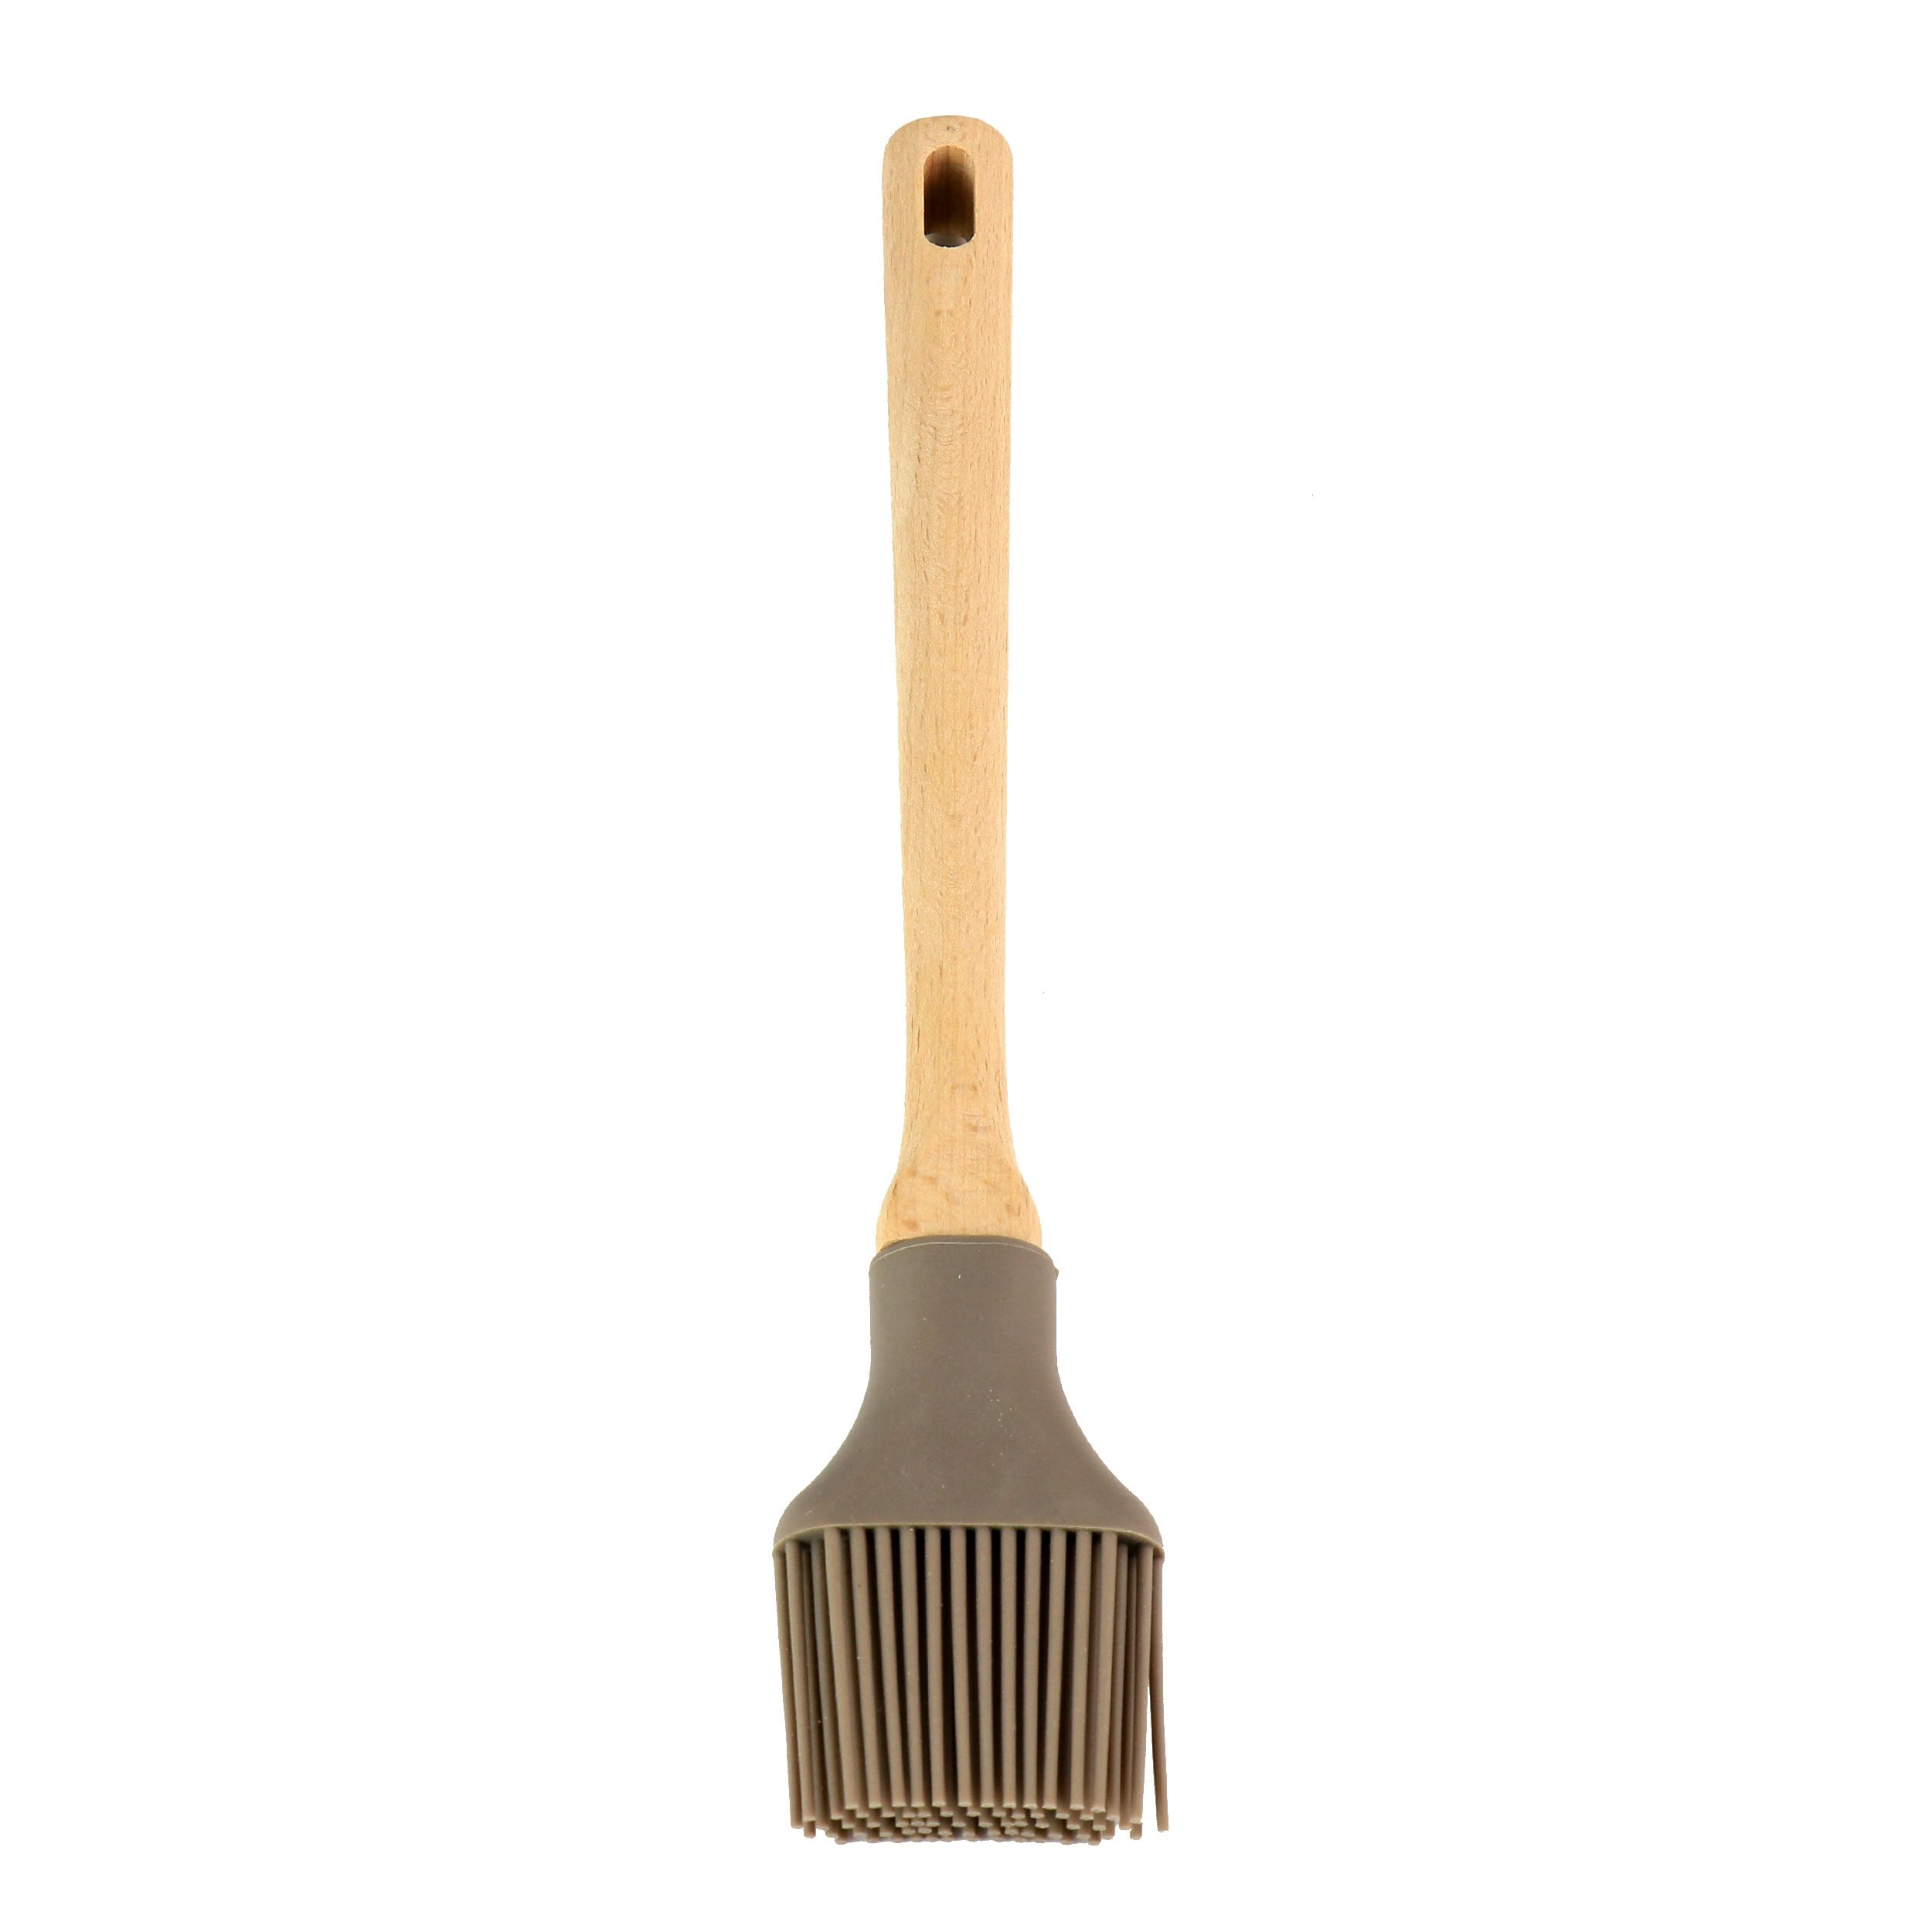 https://ak1.ostkcdn.com/images/products/is/images/direct/413cff42b7393f872549c395b0d22988ead92485/Martha-Stewart-Silicone-Basting-Brush-in-Gray.jpg